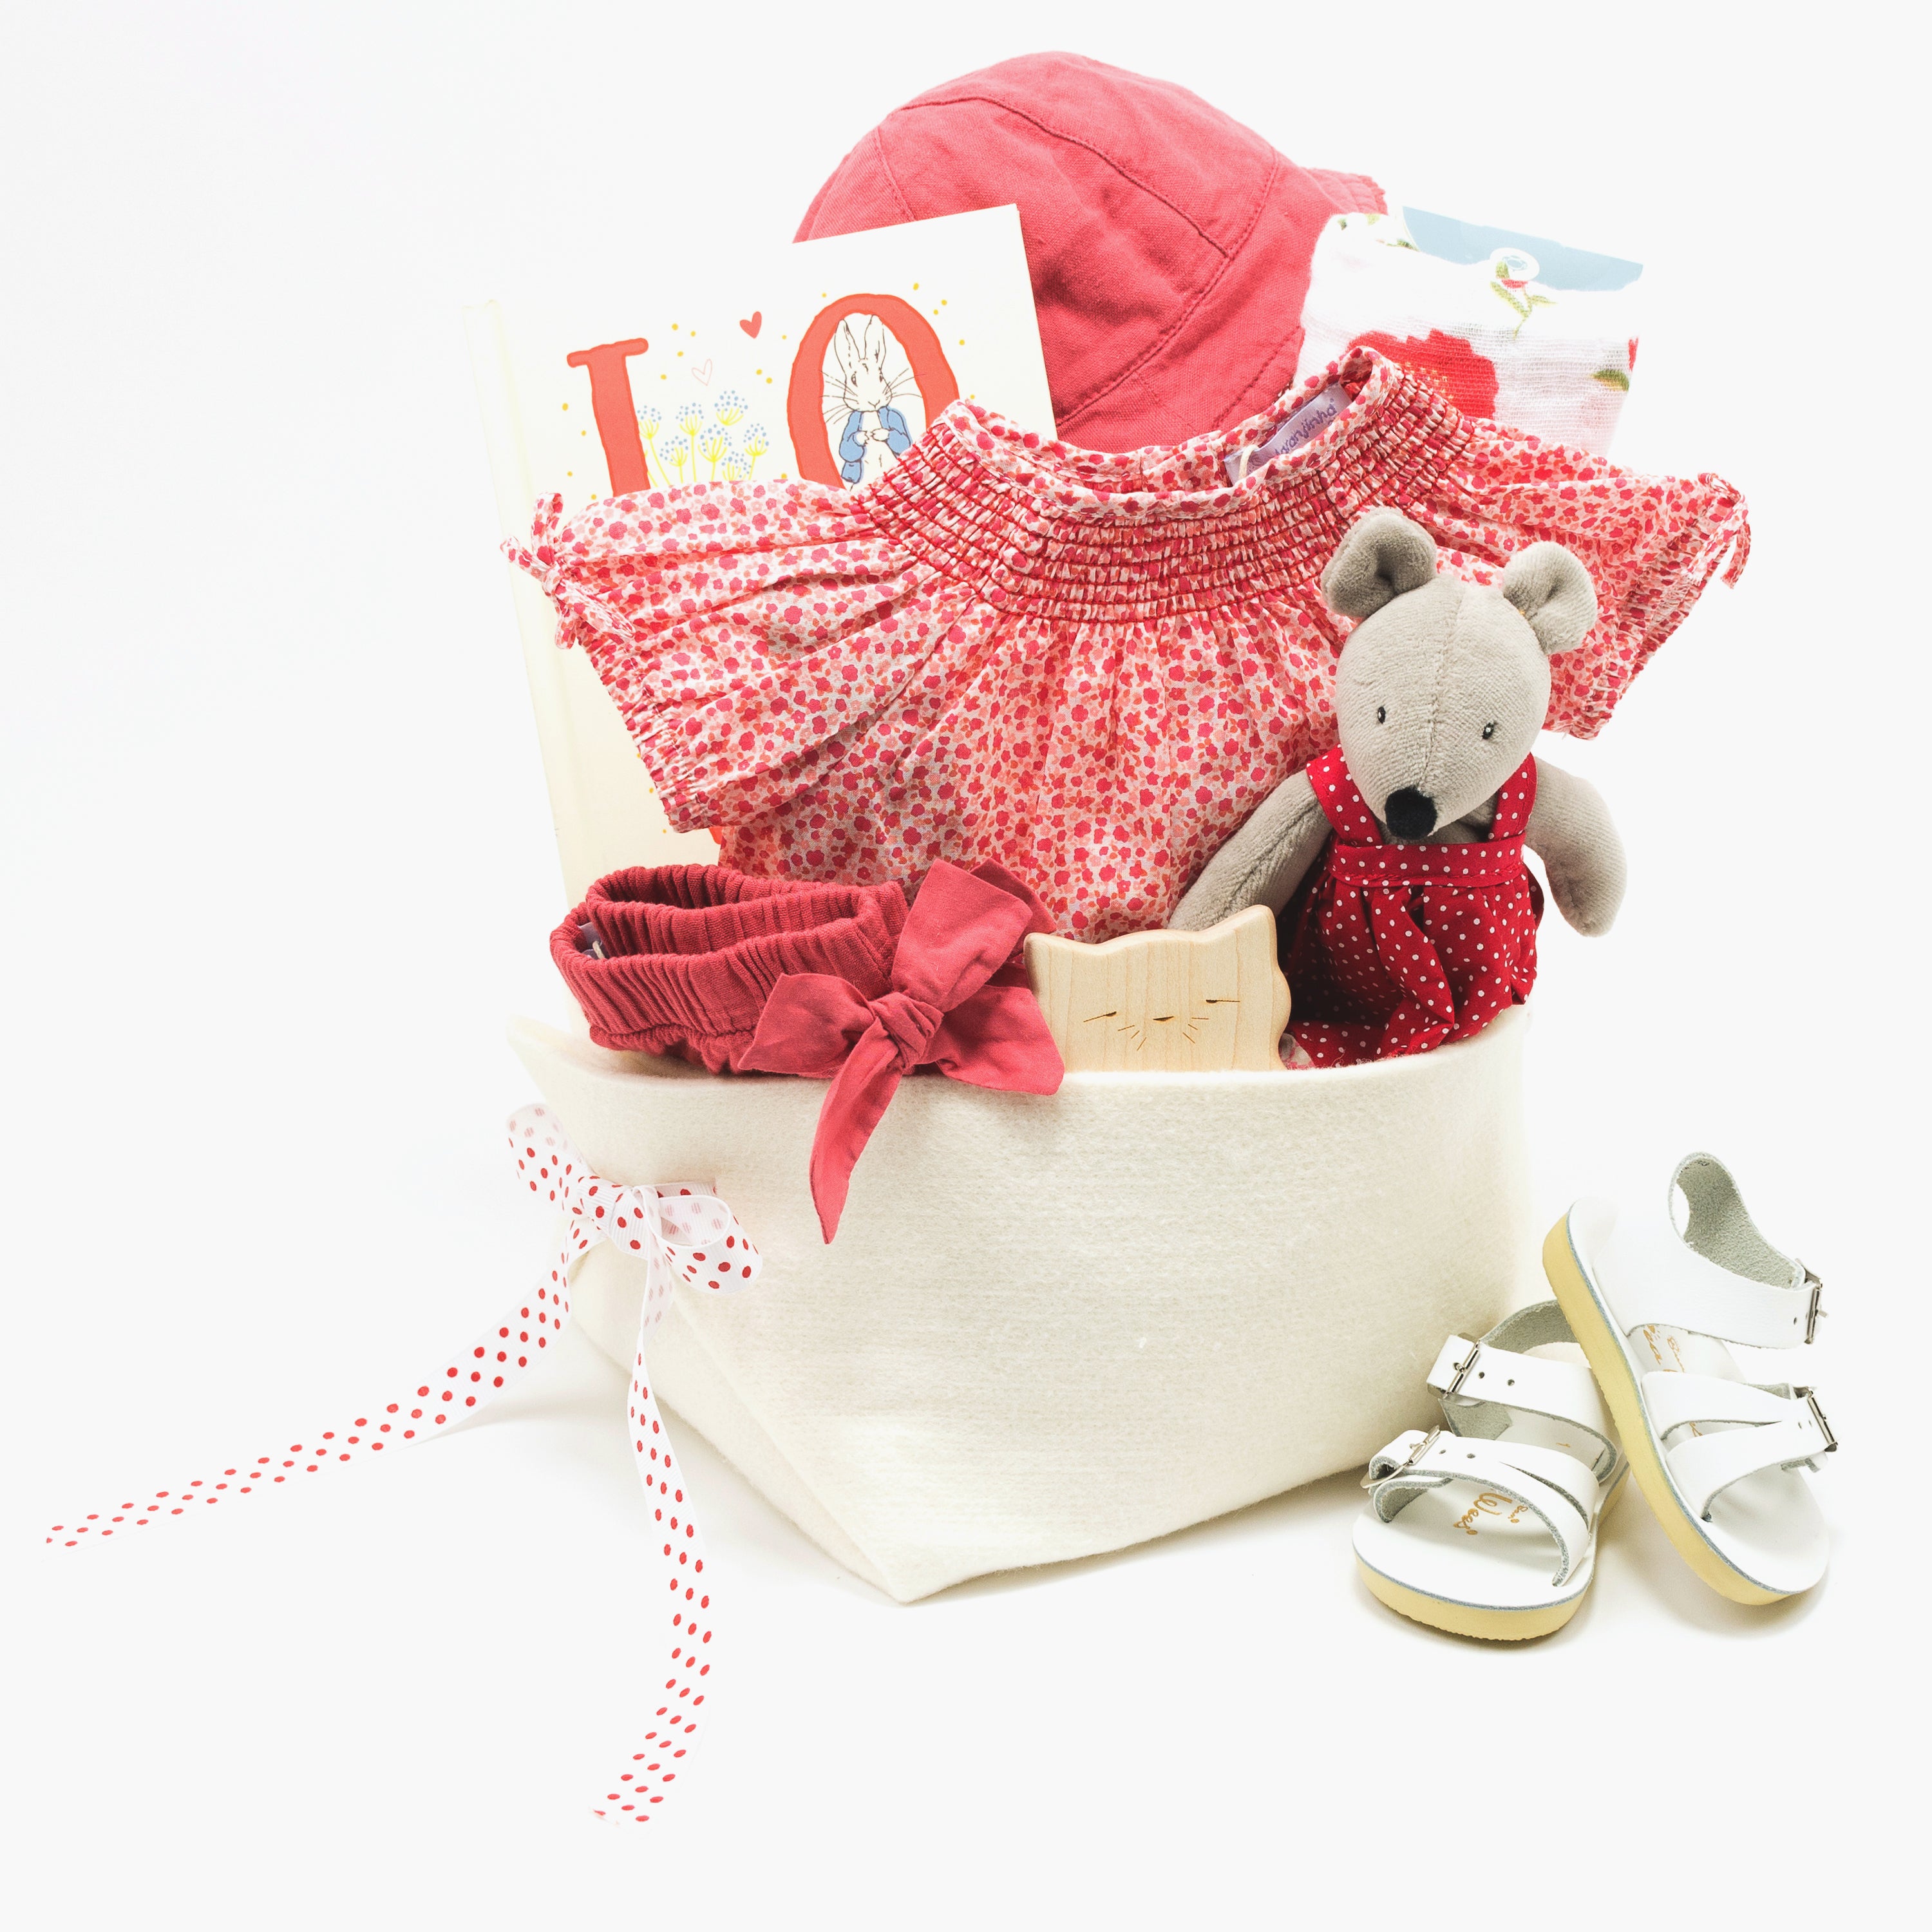 Beautiful Baby Girl Gift Basket featuring Laranjinha from Portugal at Bonjour Baby Baskets